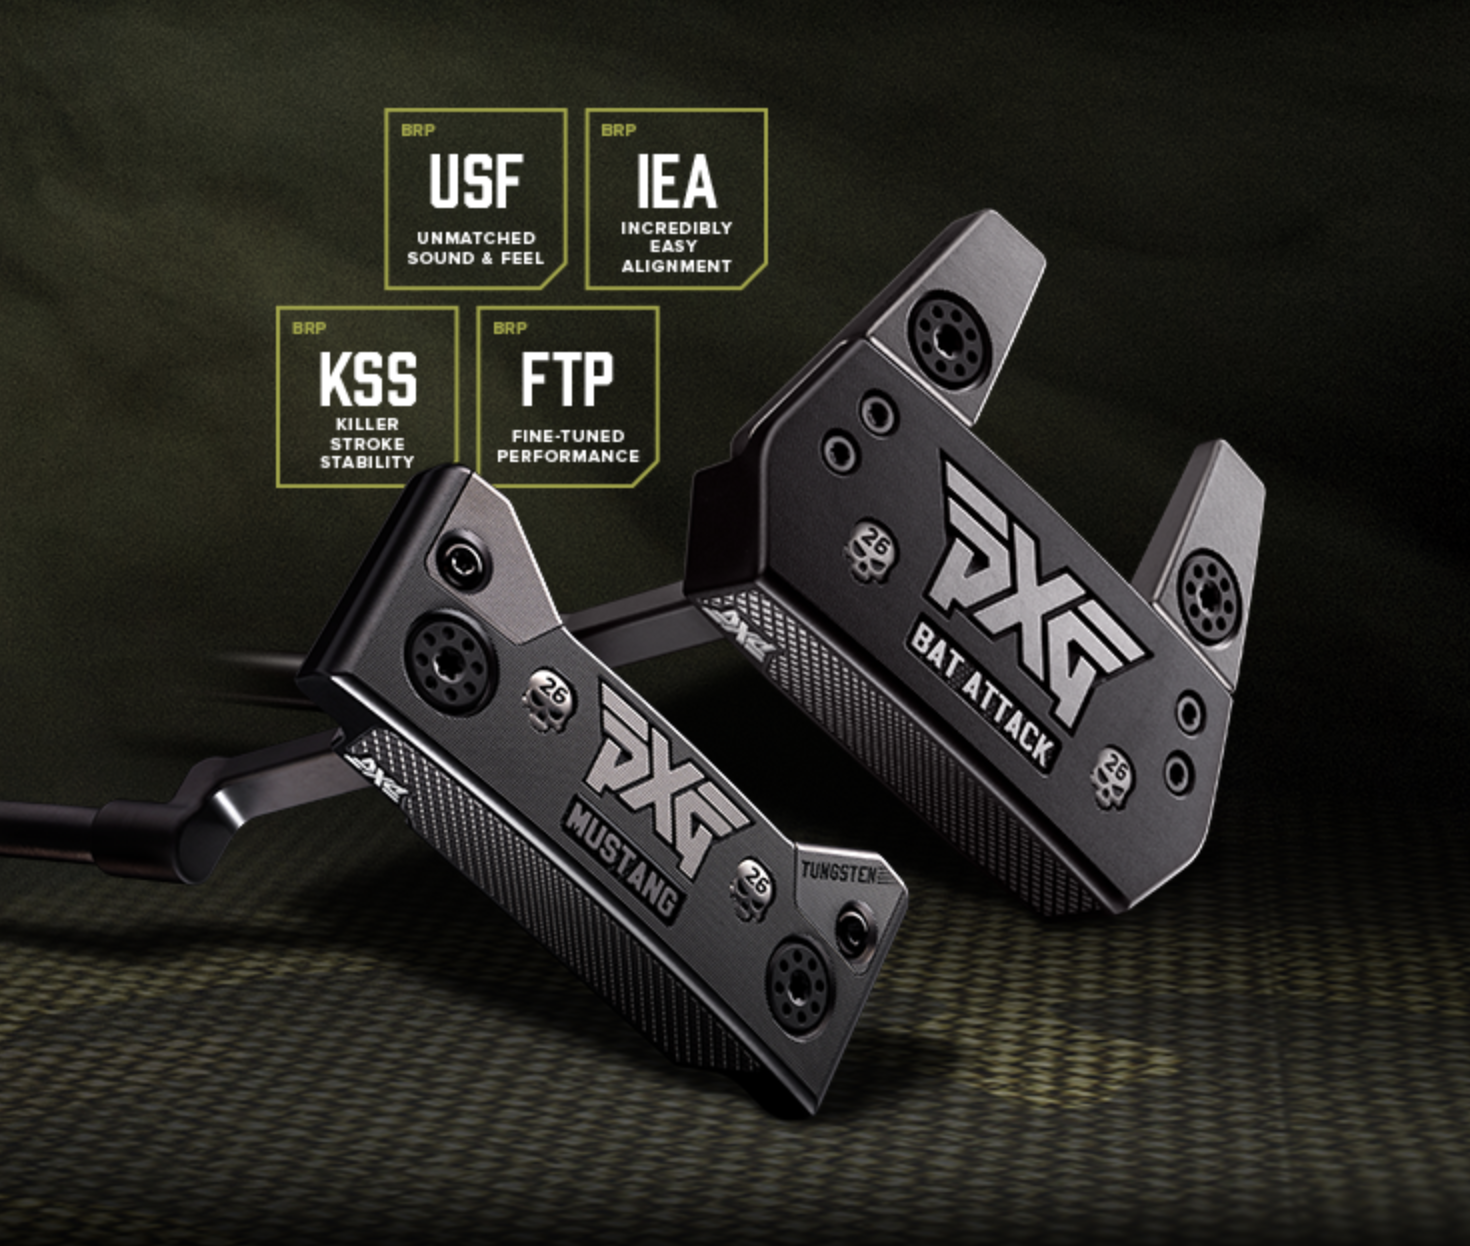 PXG expanding Battle Ready putter collection with Mustang and Bat